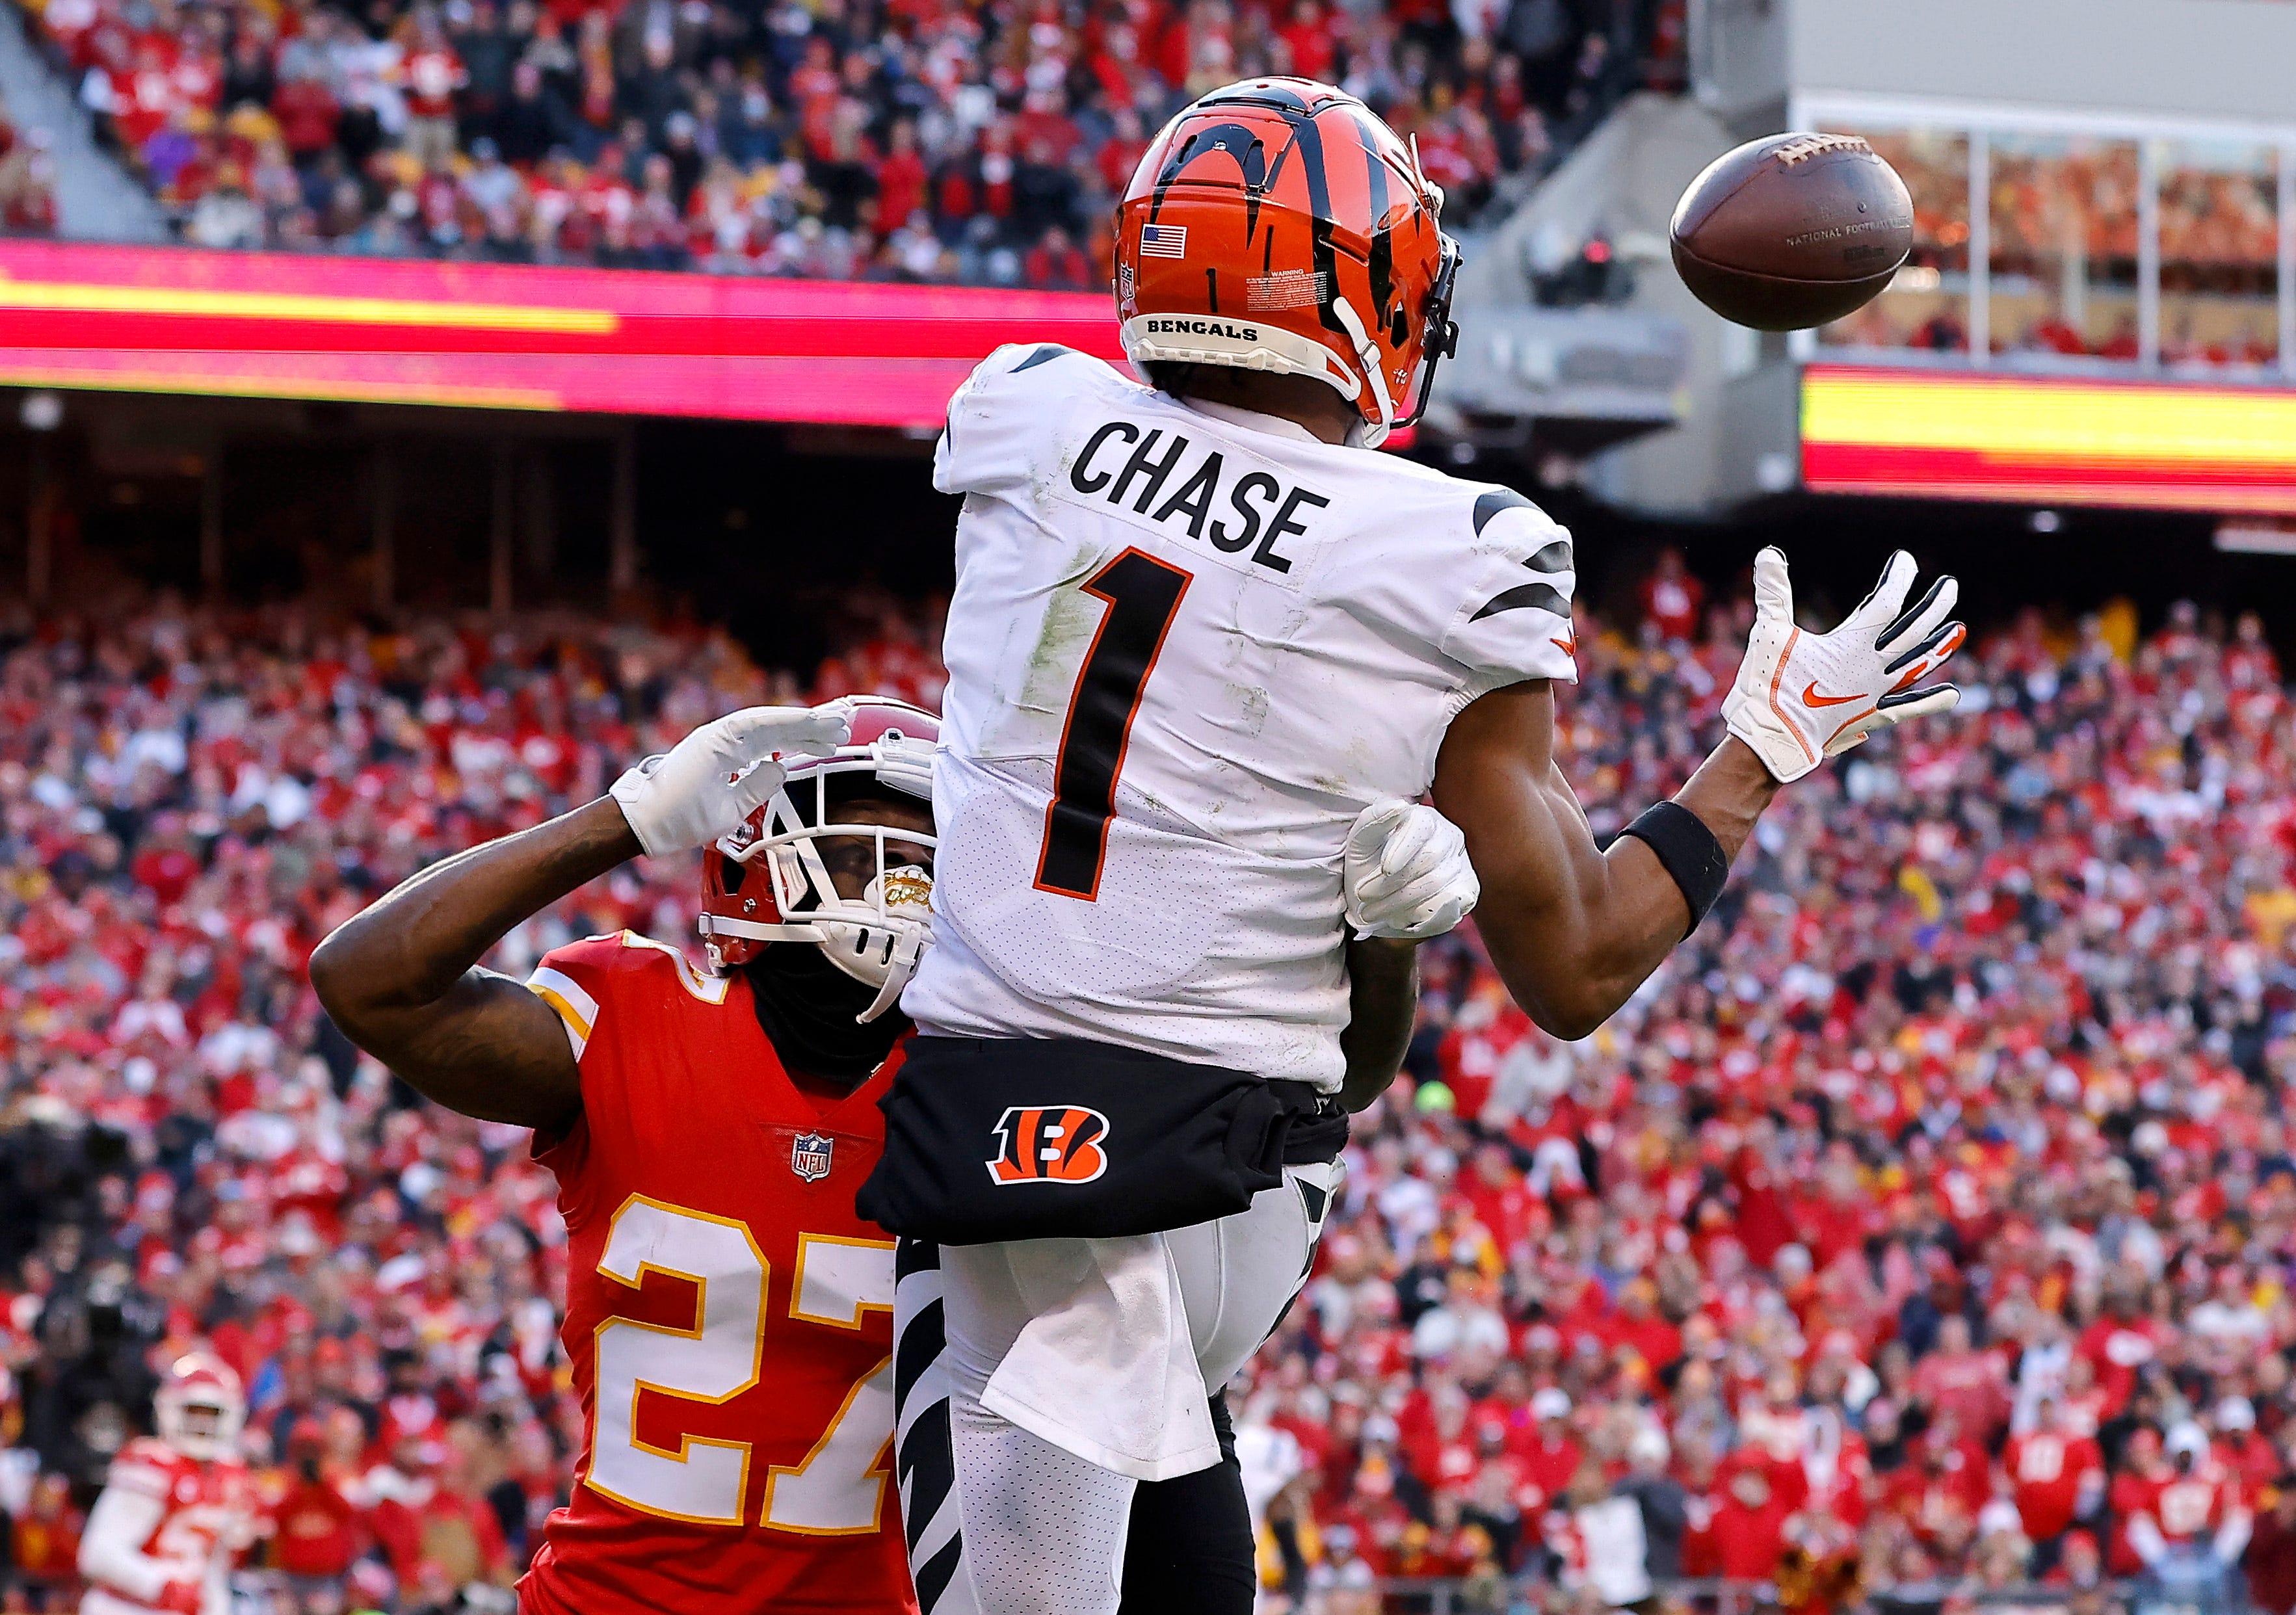 Bengals vs. Chiefs TD picks: Count on Ja'Marr Chase to score